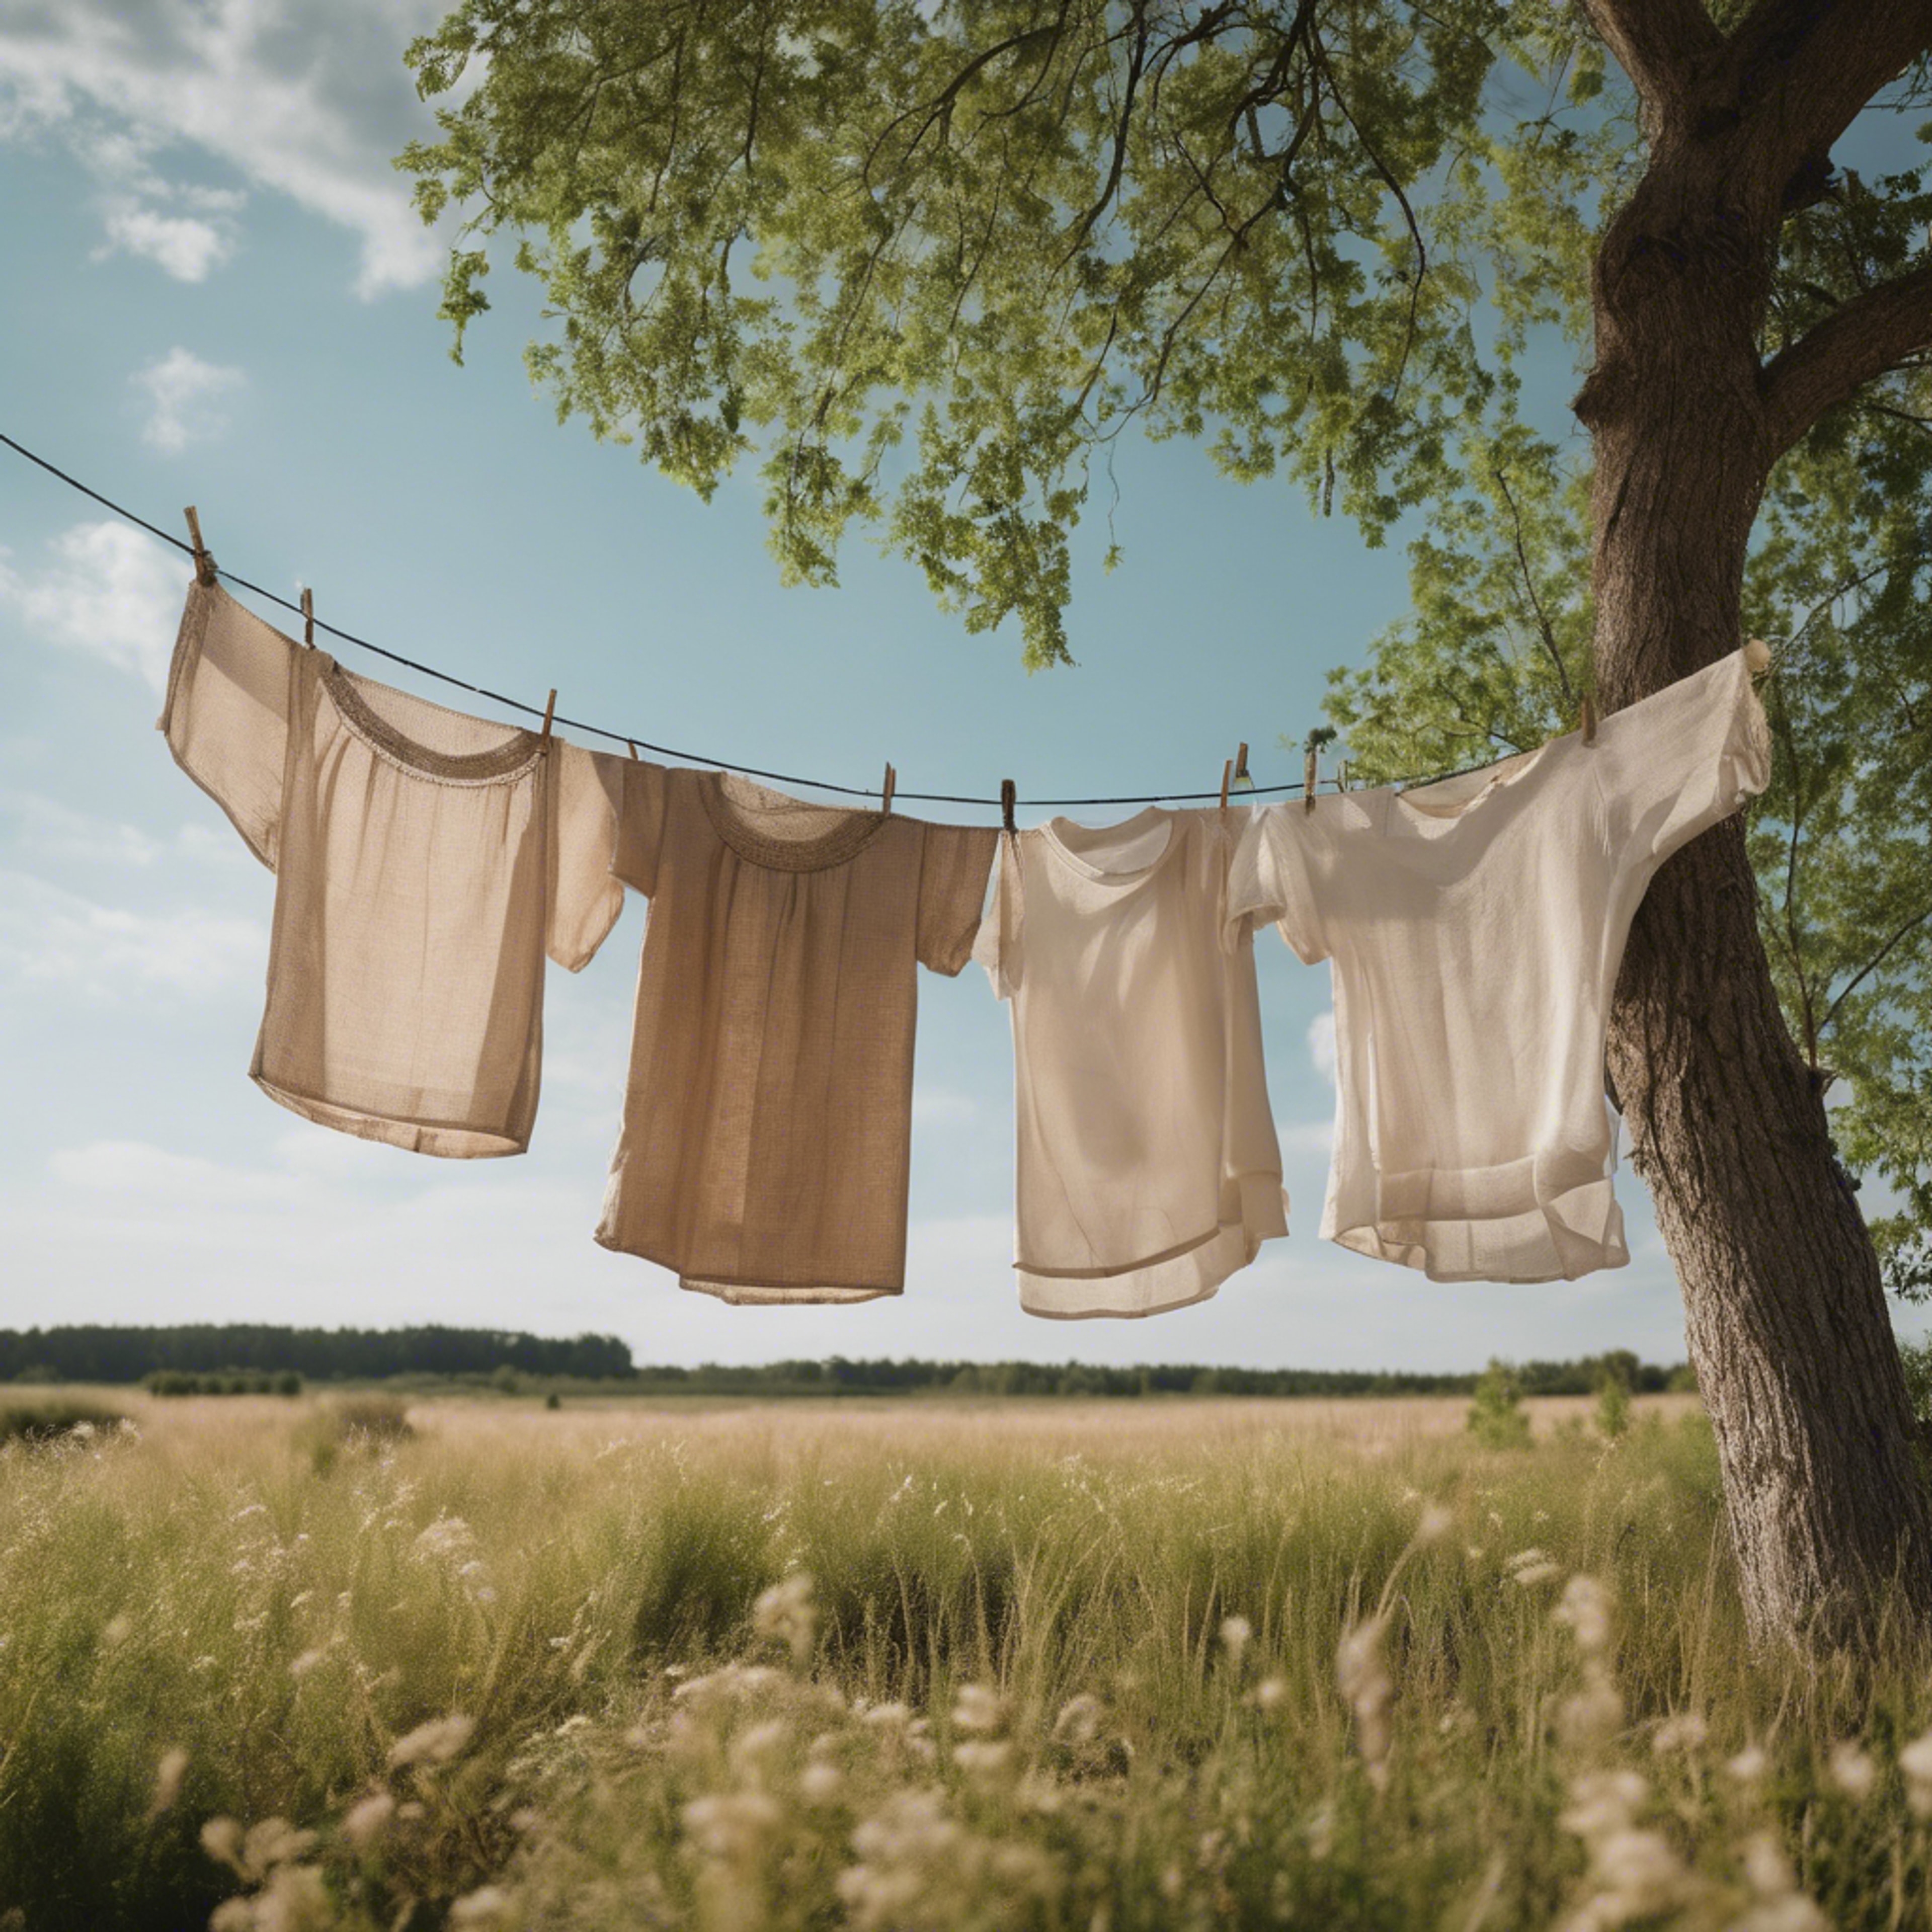 Linen dresses hanging on a clothesline drying in gentle summer breeze. Wallpaper[8f22f8c19713435ab90a]